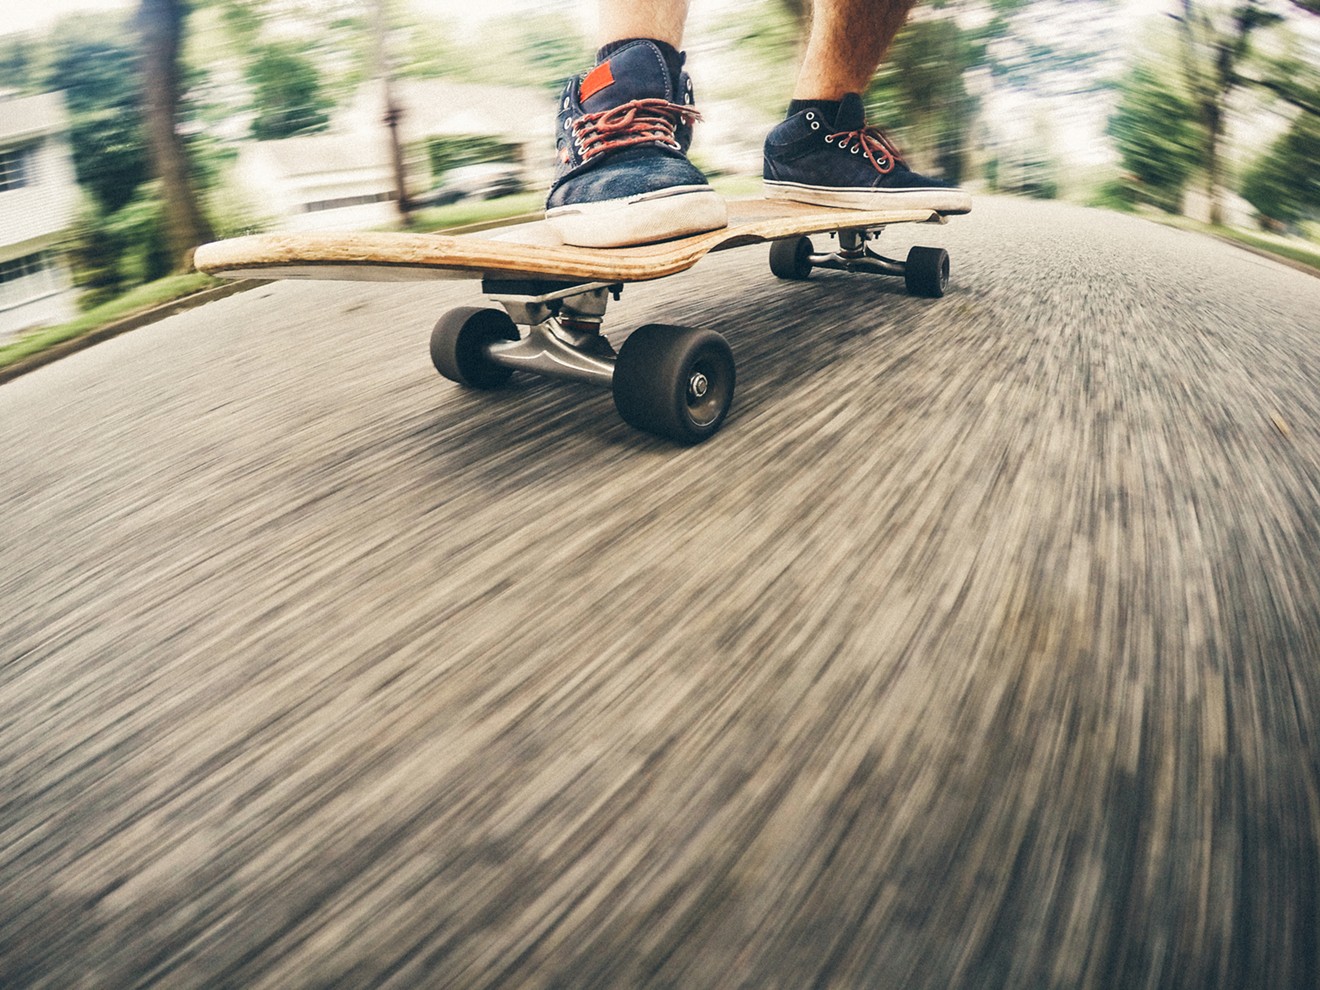 Downhill skateboarding is growing in popularity, and a proposed park devoted to the sport would be the first of its kind in the U.S.